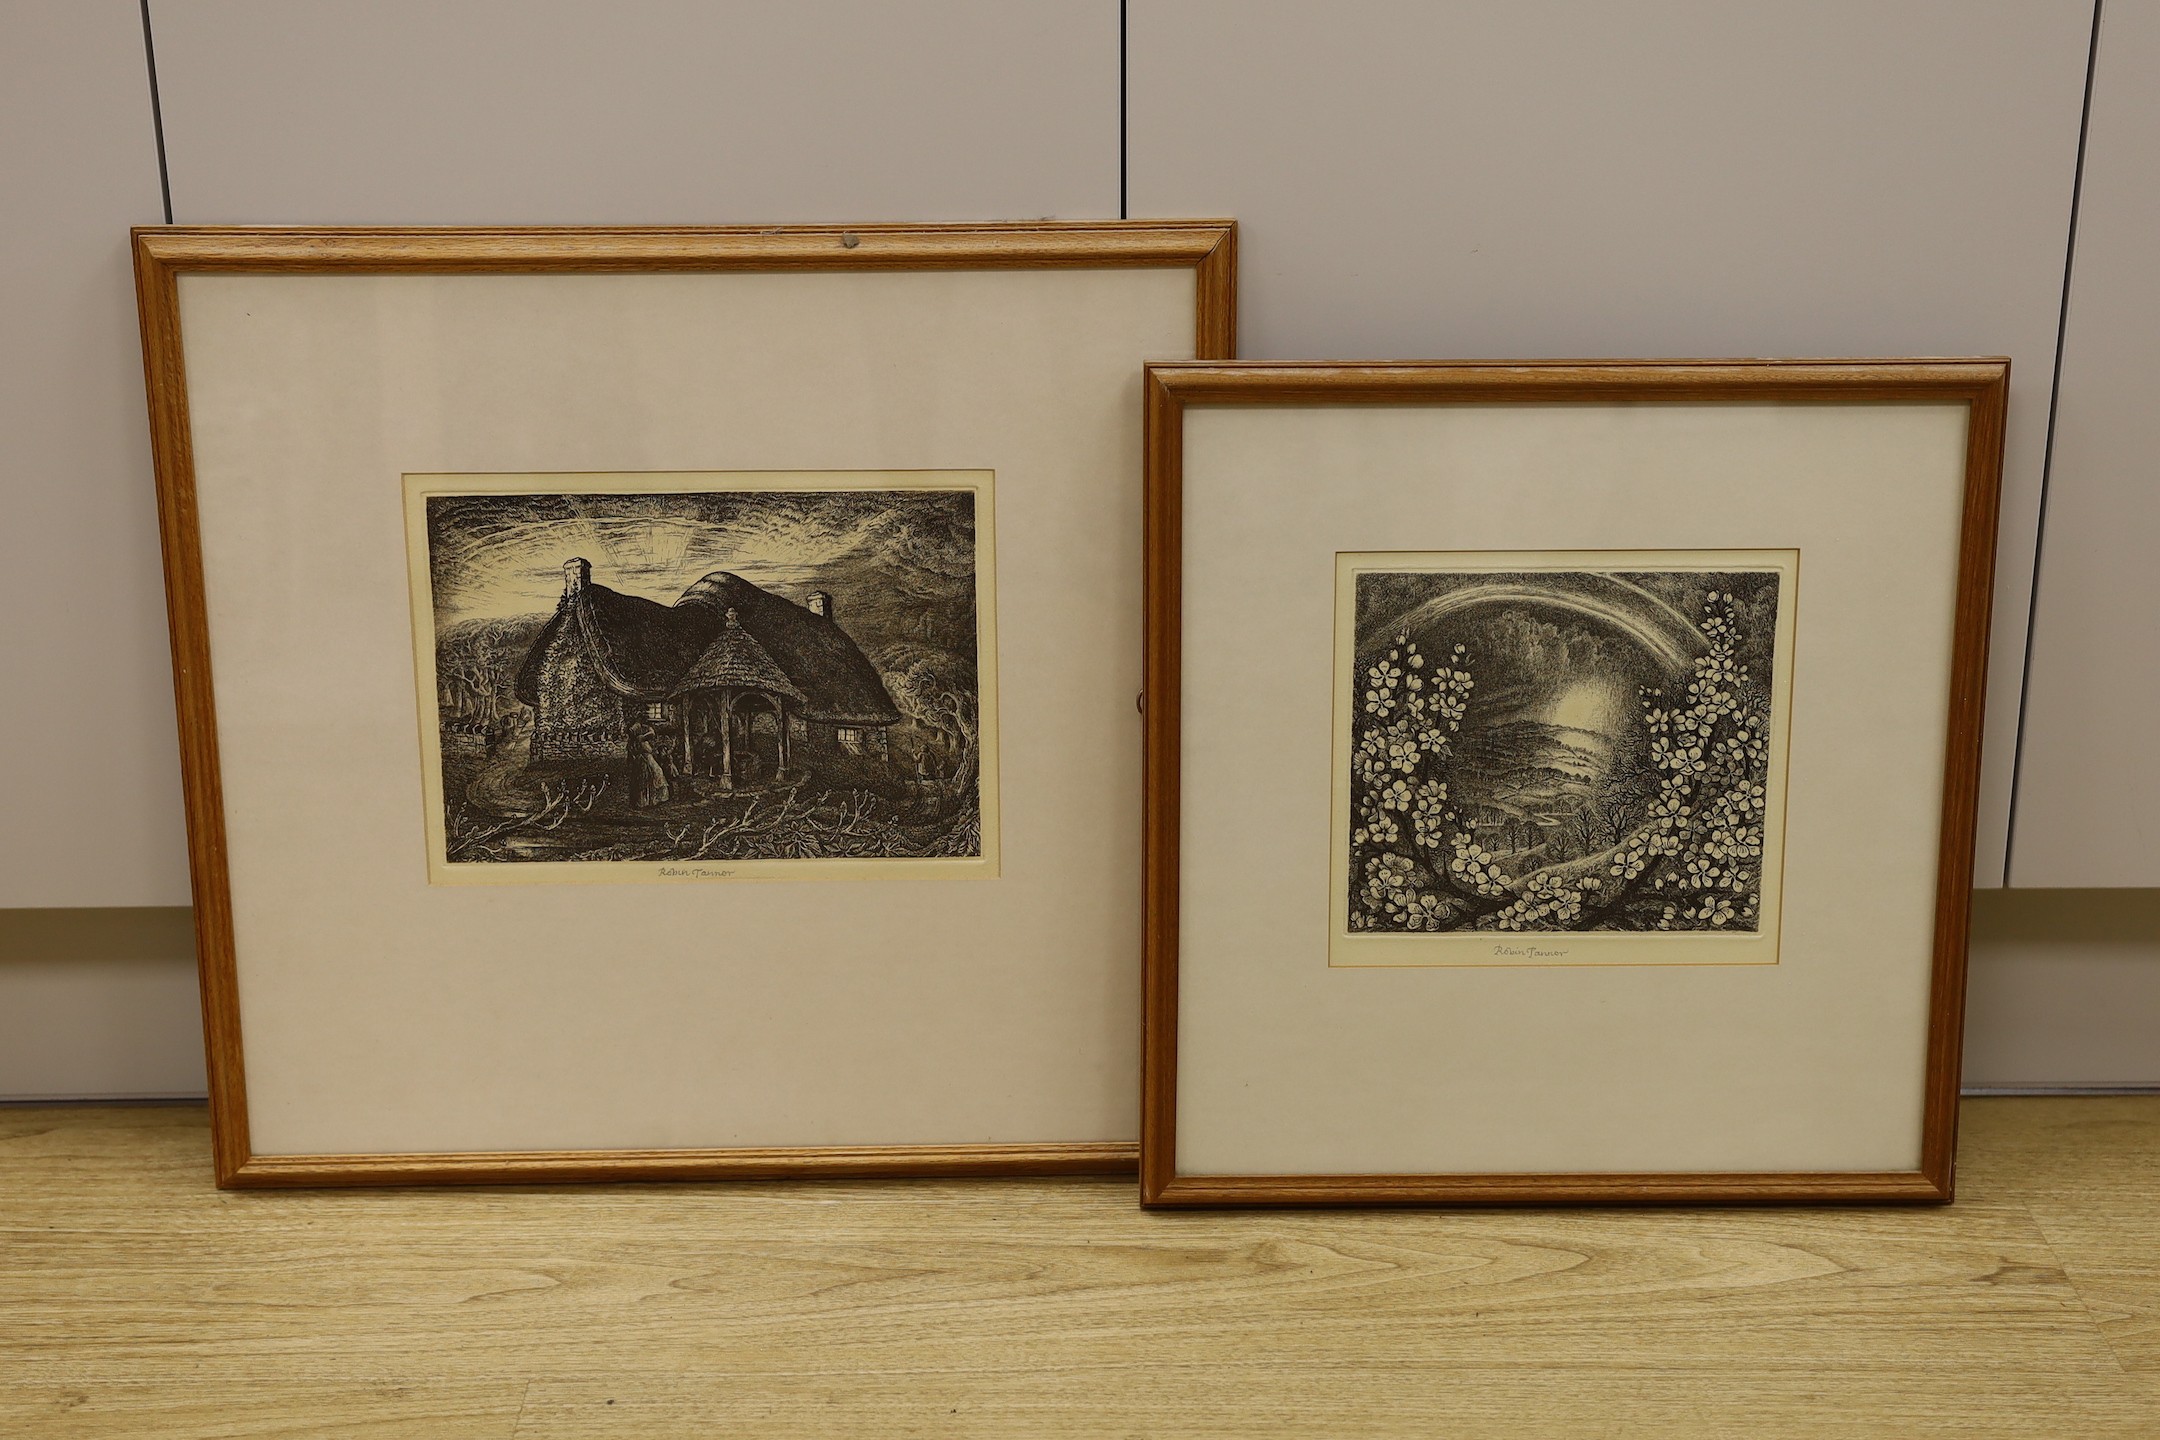 Robin Tanner (1904-1988), two etchings, woodland scene and cottage, 23 x 25cm, both signed in pencil